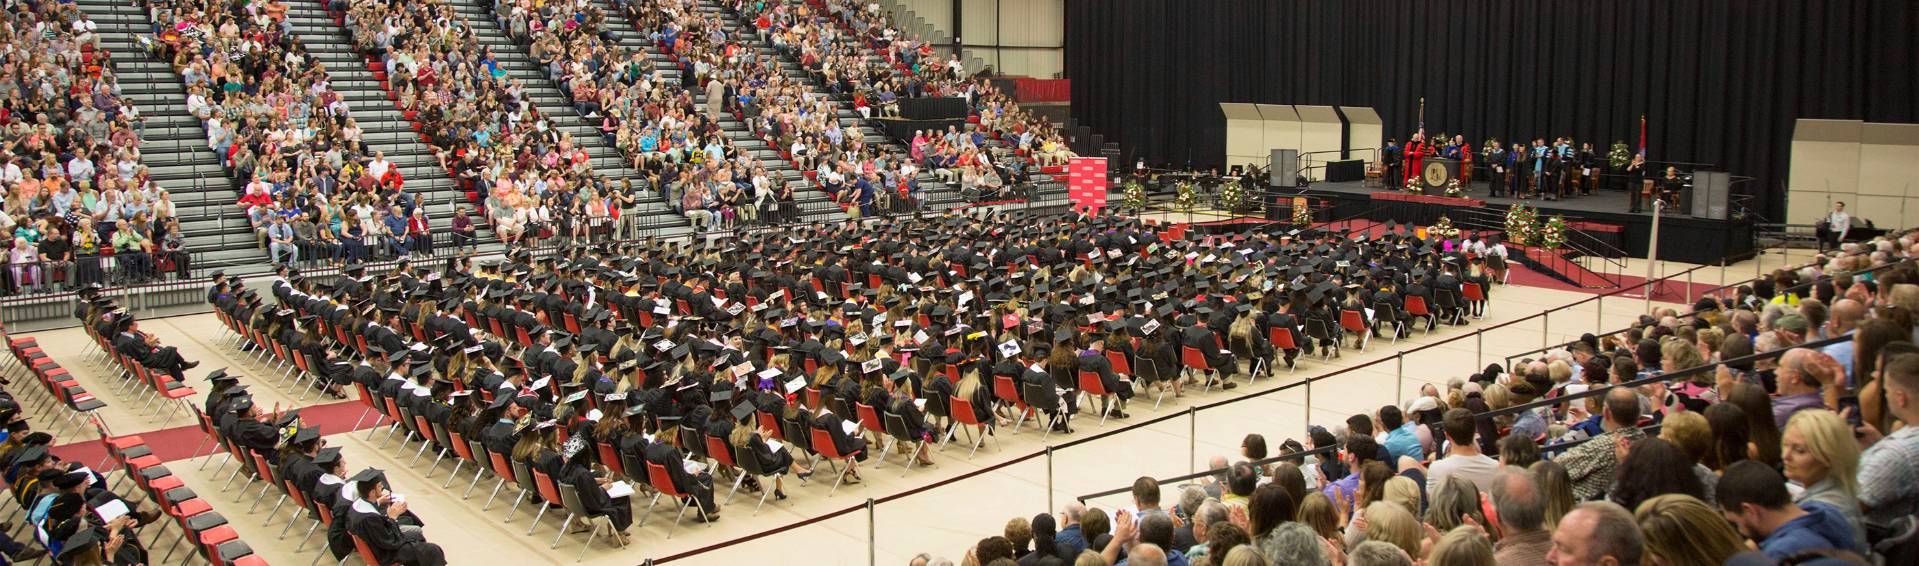 View of a UCM commencement ceremony in progress